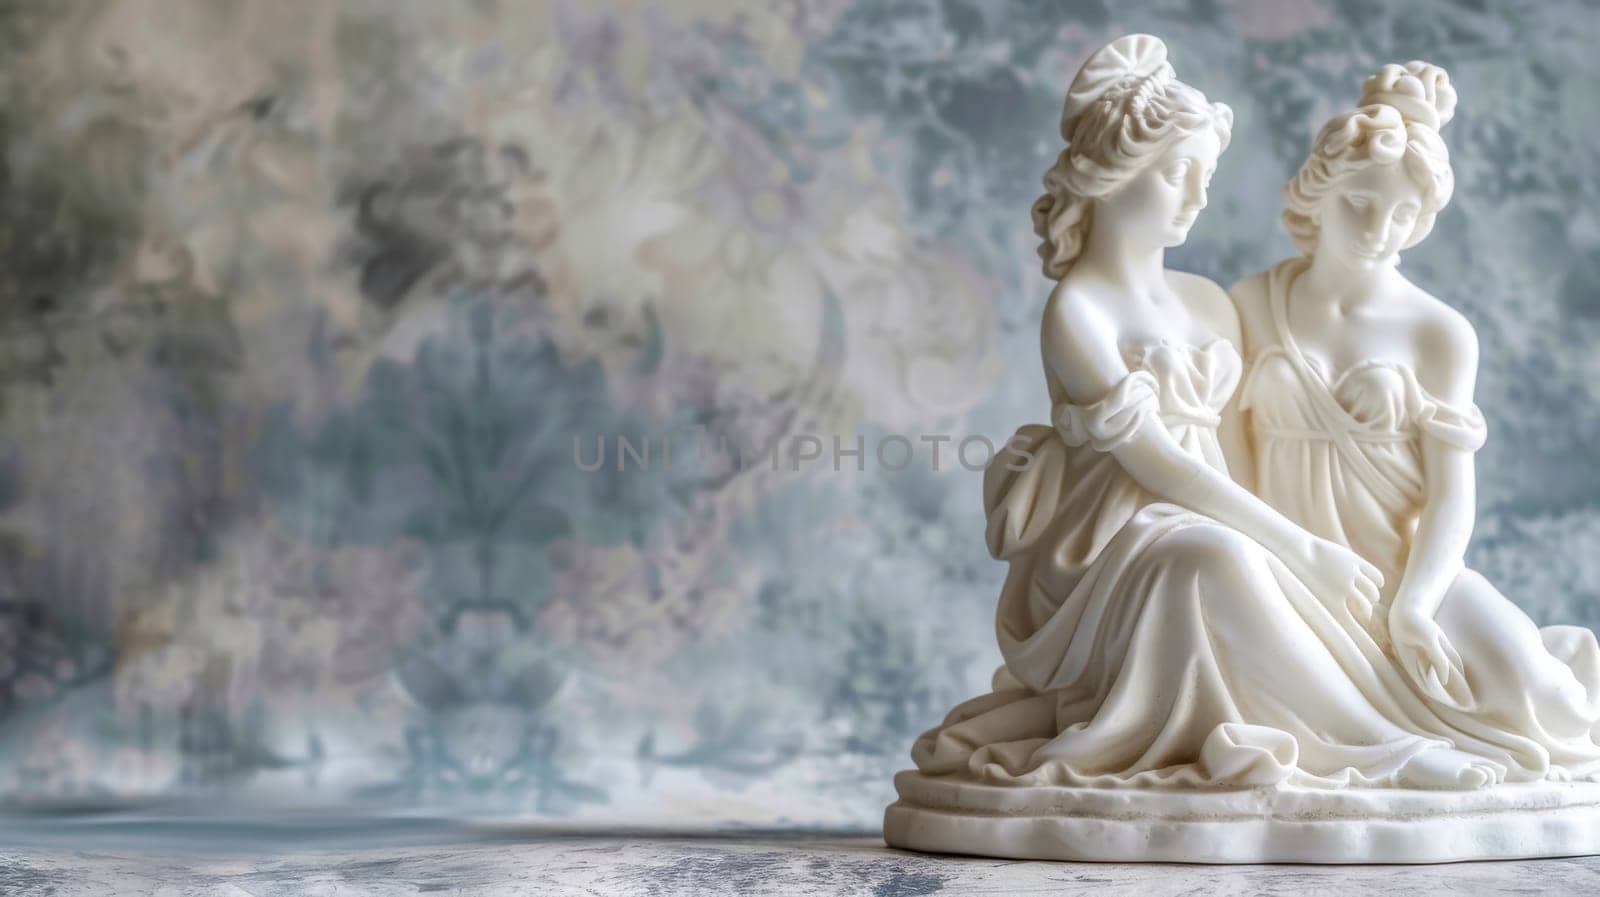 Classical sculpture of two women in ethereal setting by Edophoto